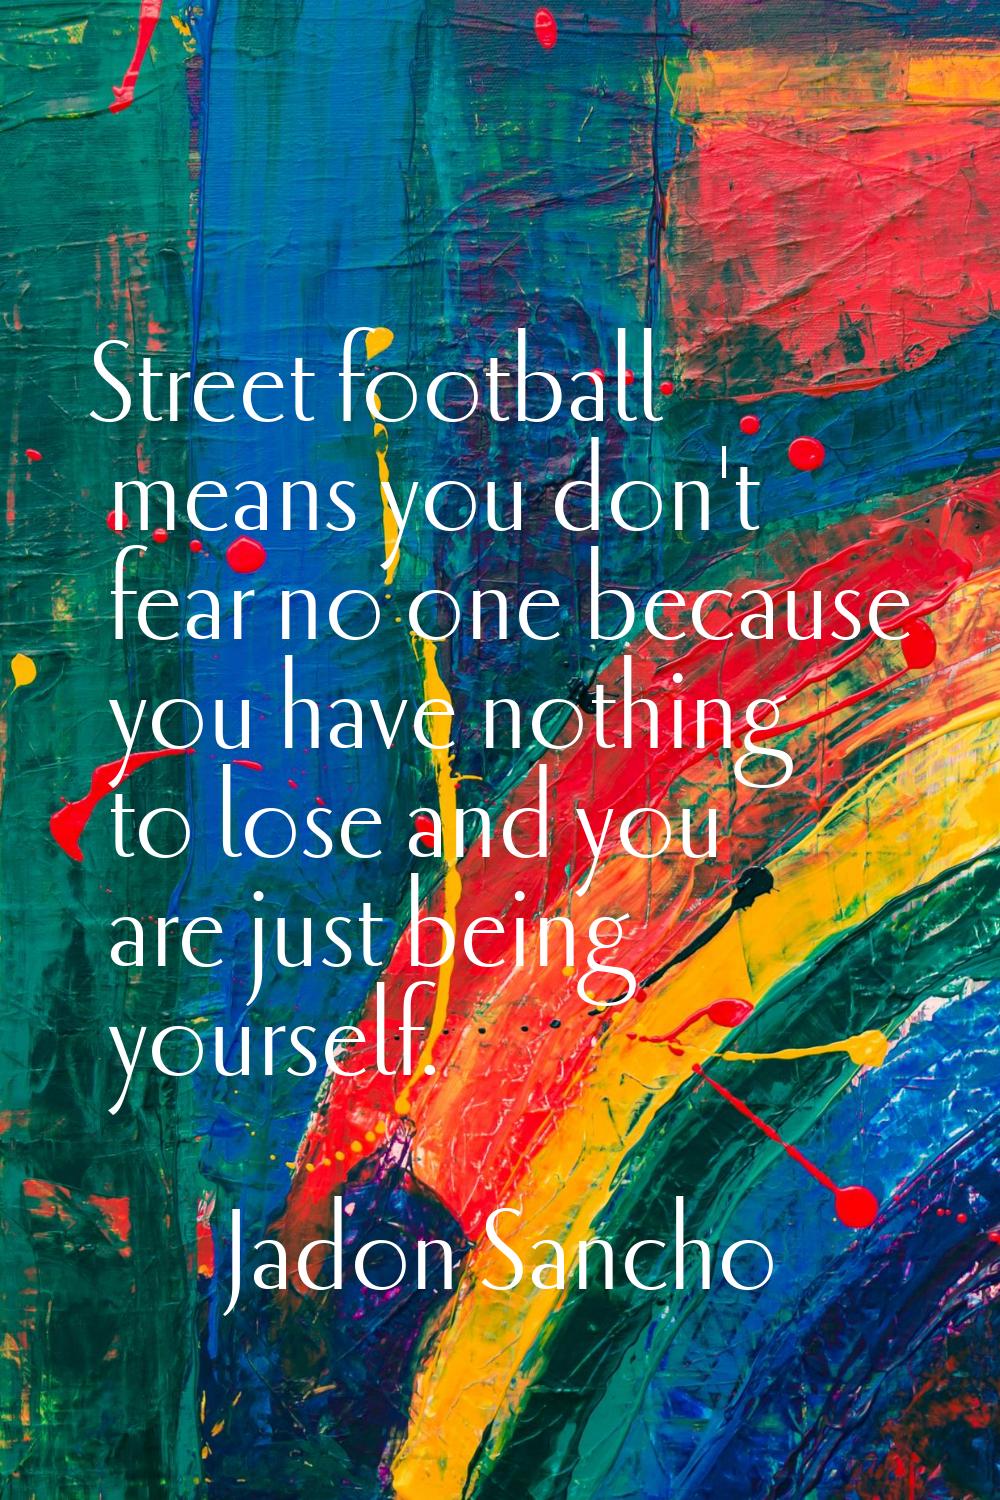 Street football means you don't fear no one because you have nothing to lose and you are just being